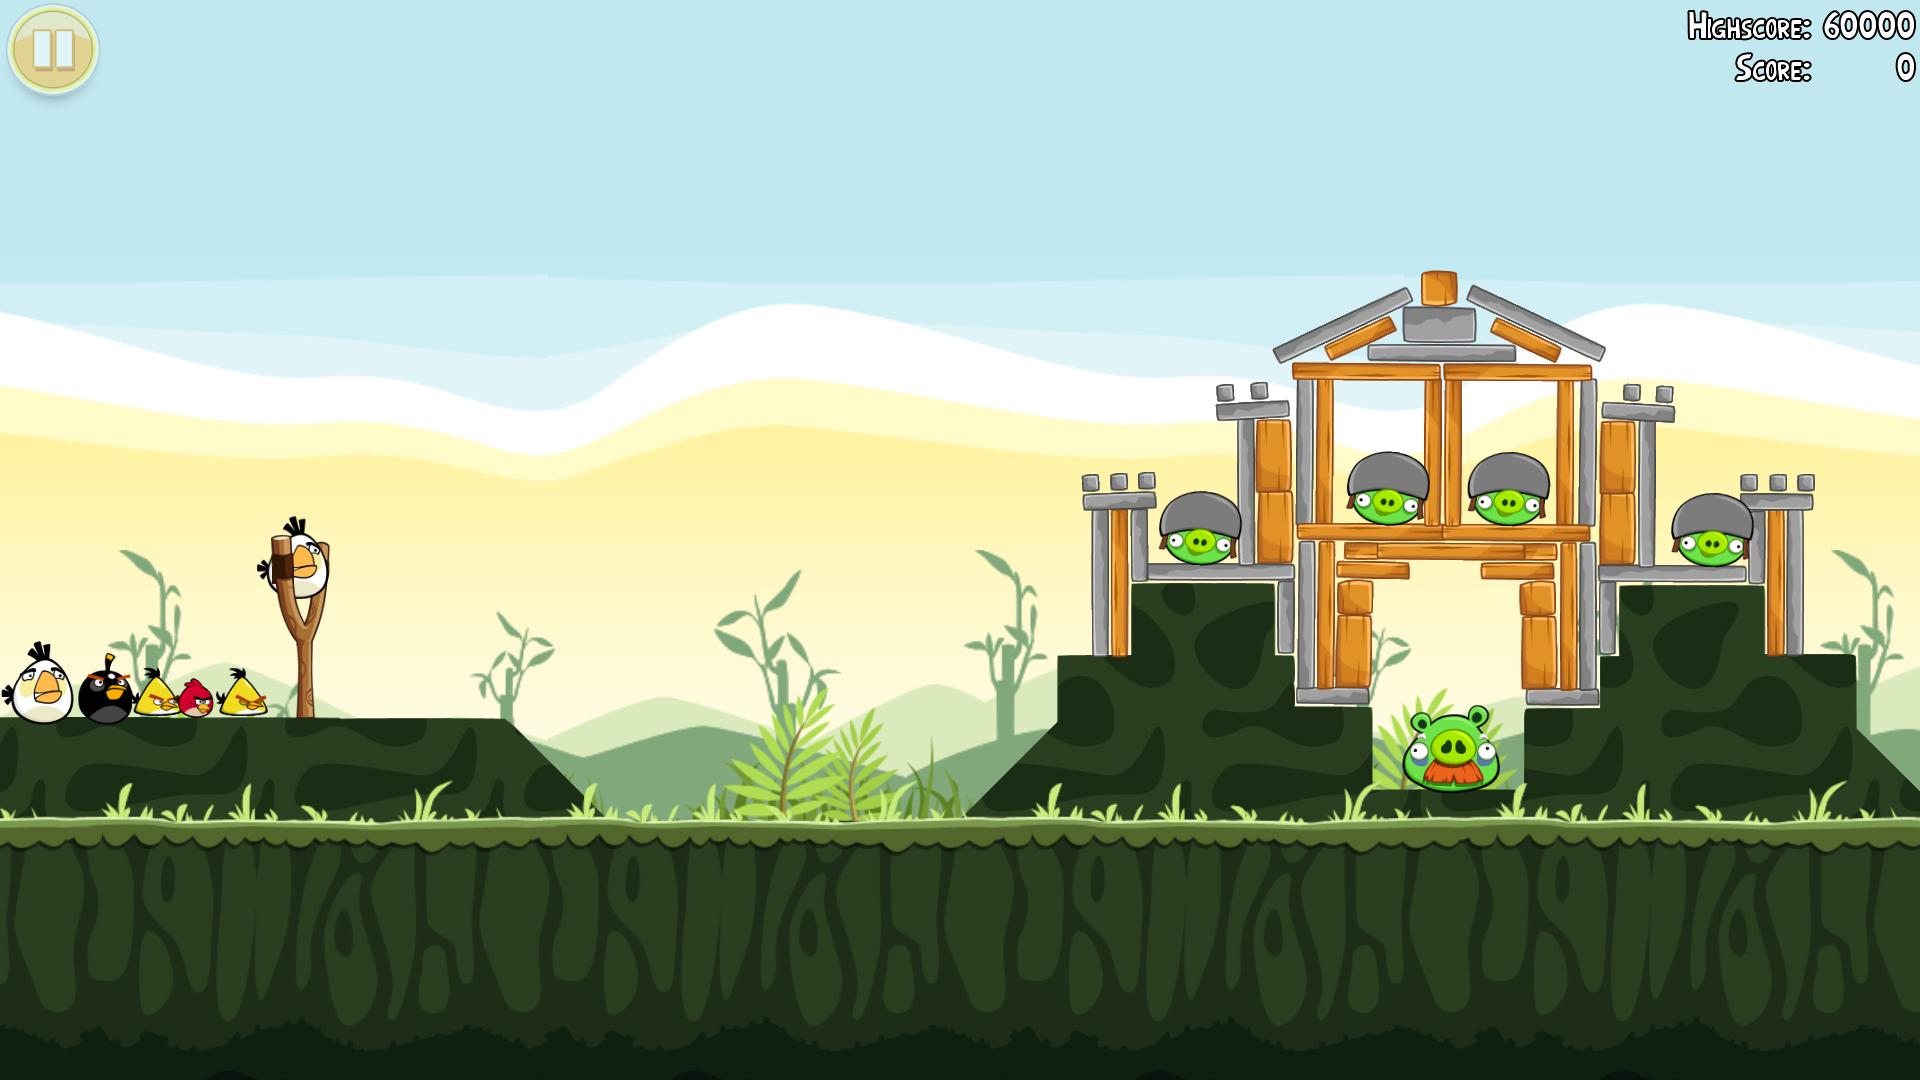 Angry-Birds-game scene